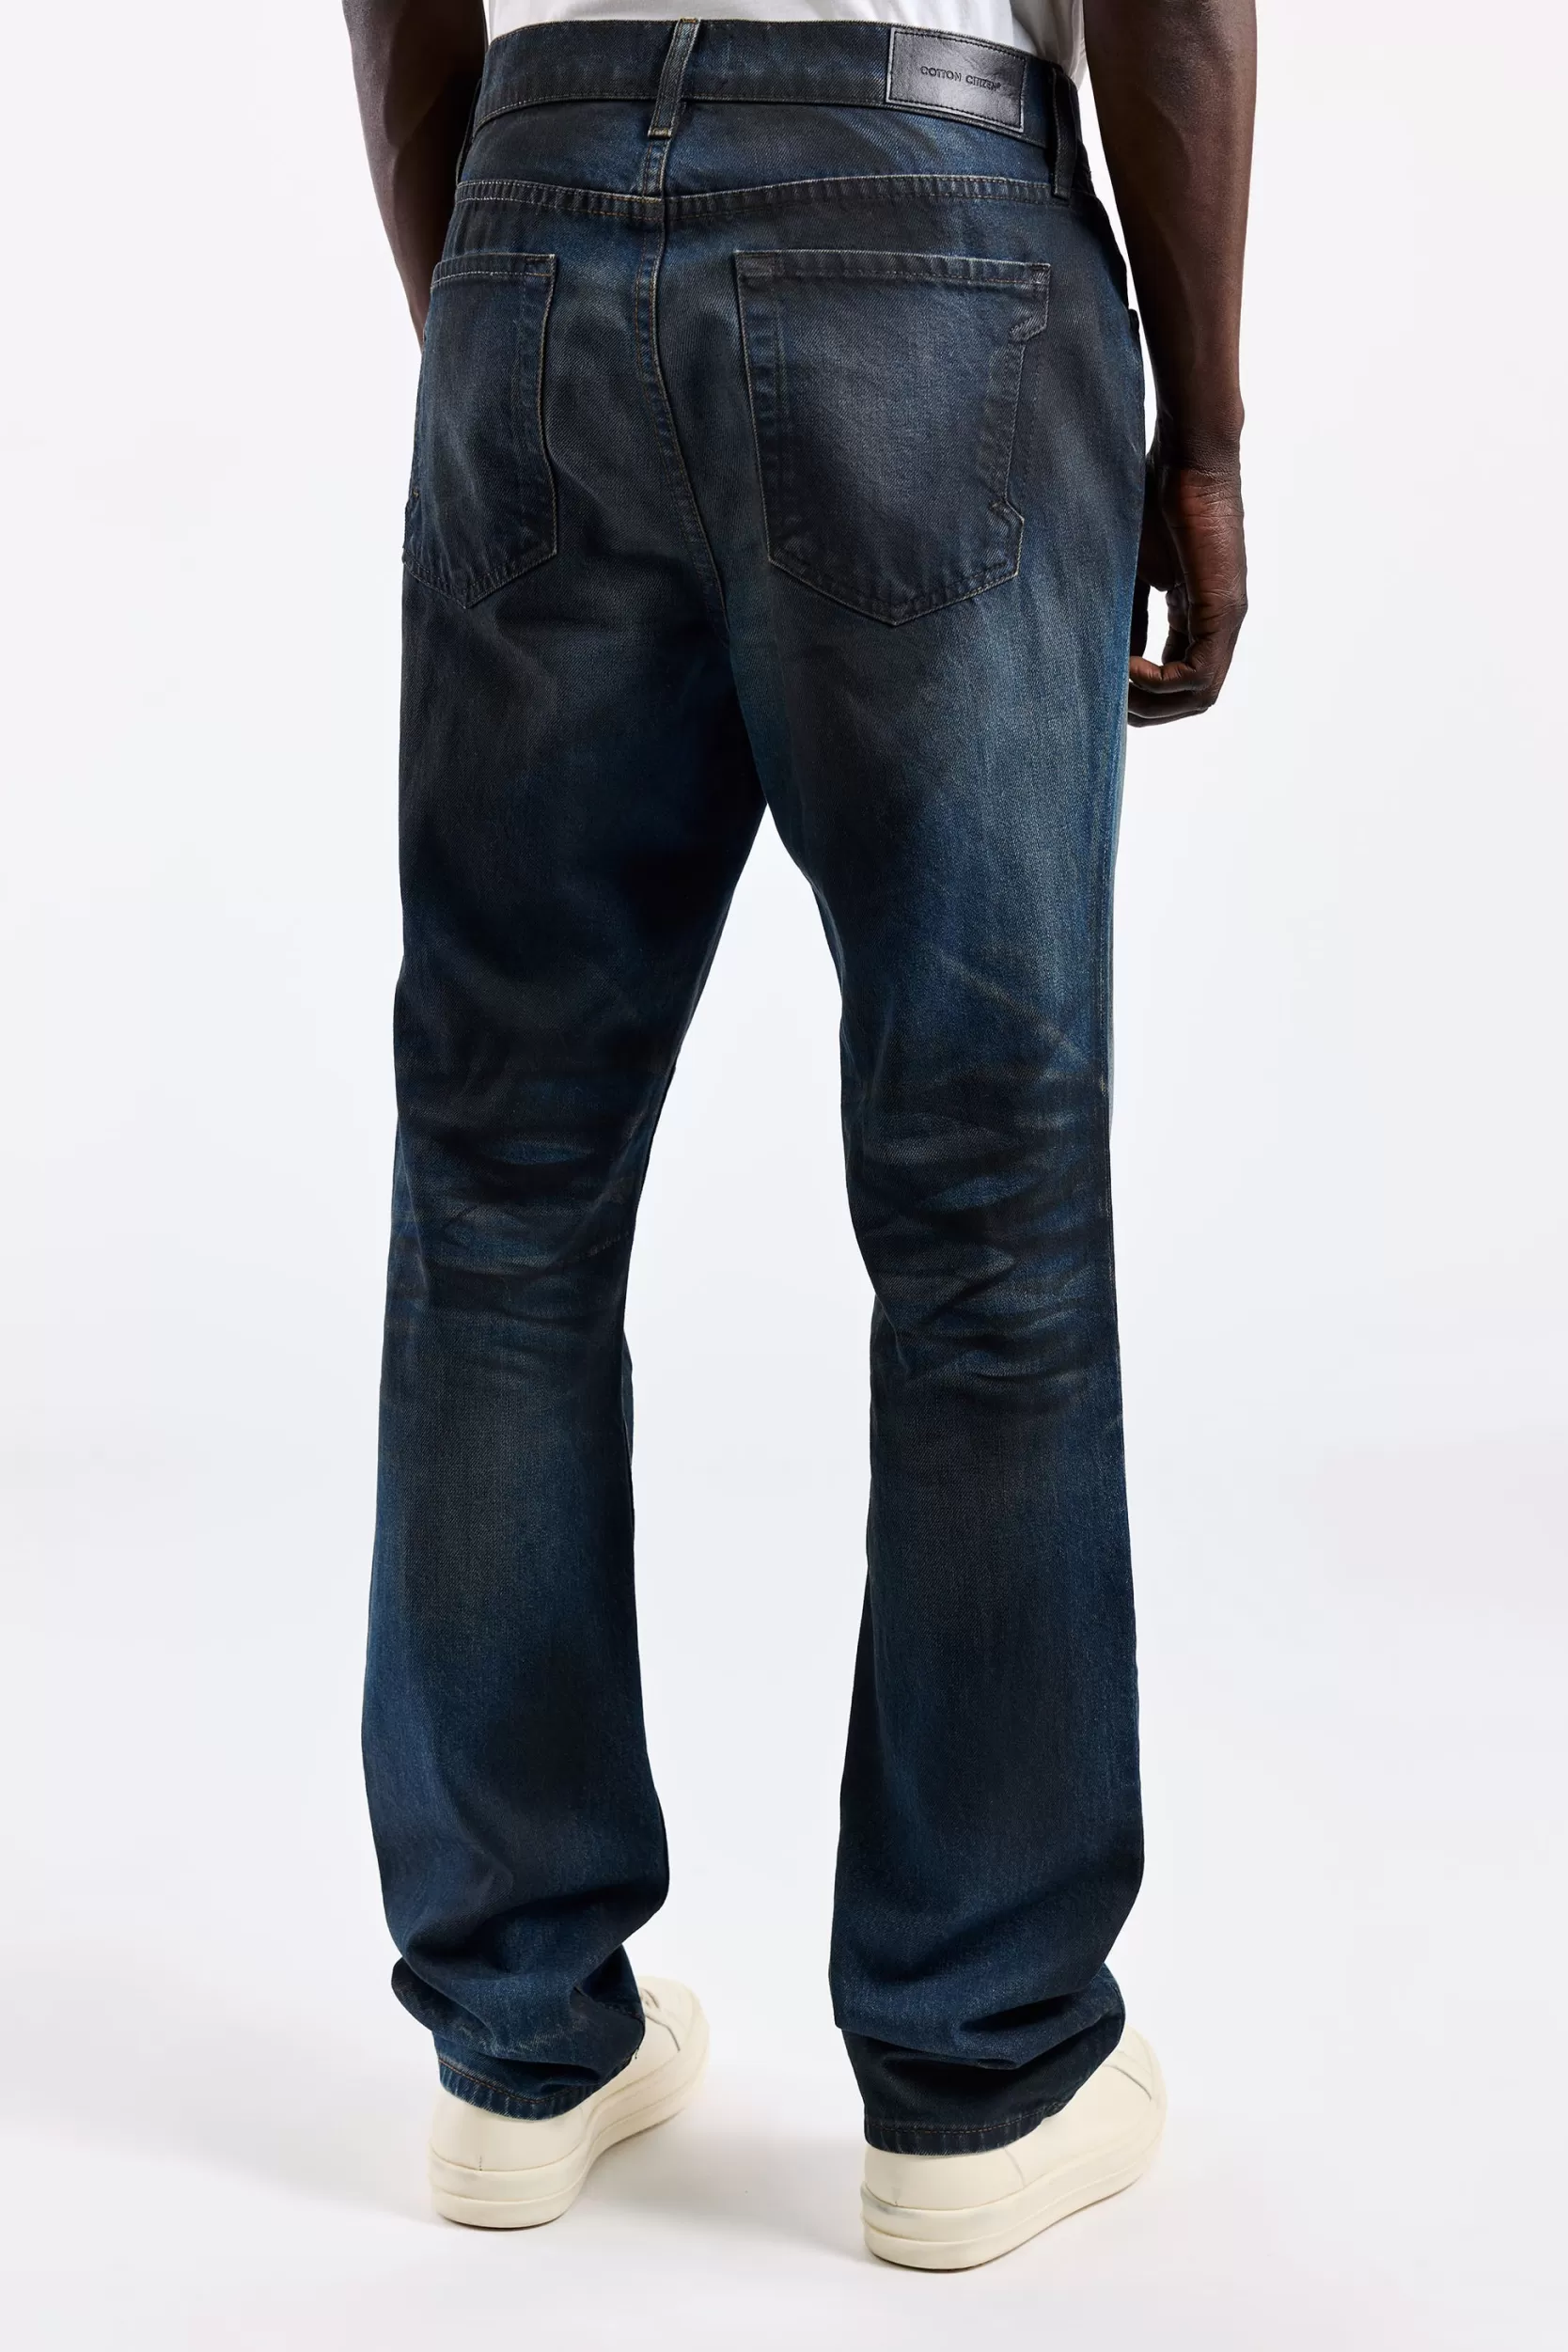 COTTONCITIZEN Marley Jean (Sale)^ THE MECHANIC | THE OVERSHIRT